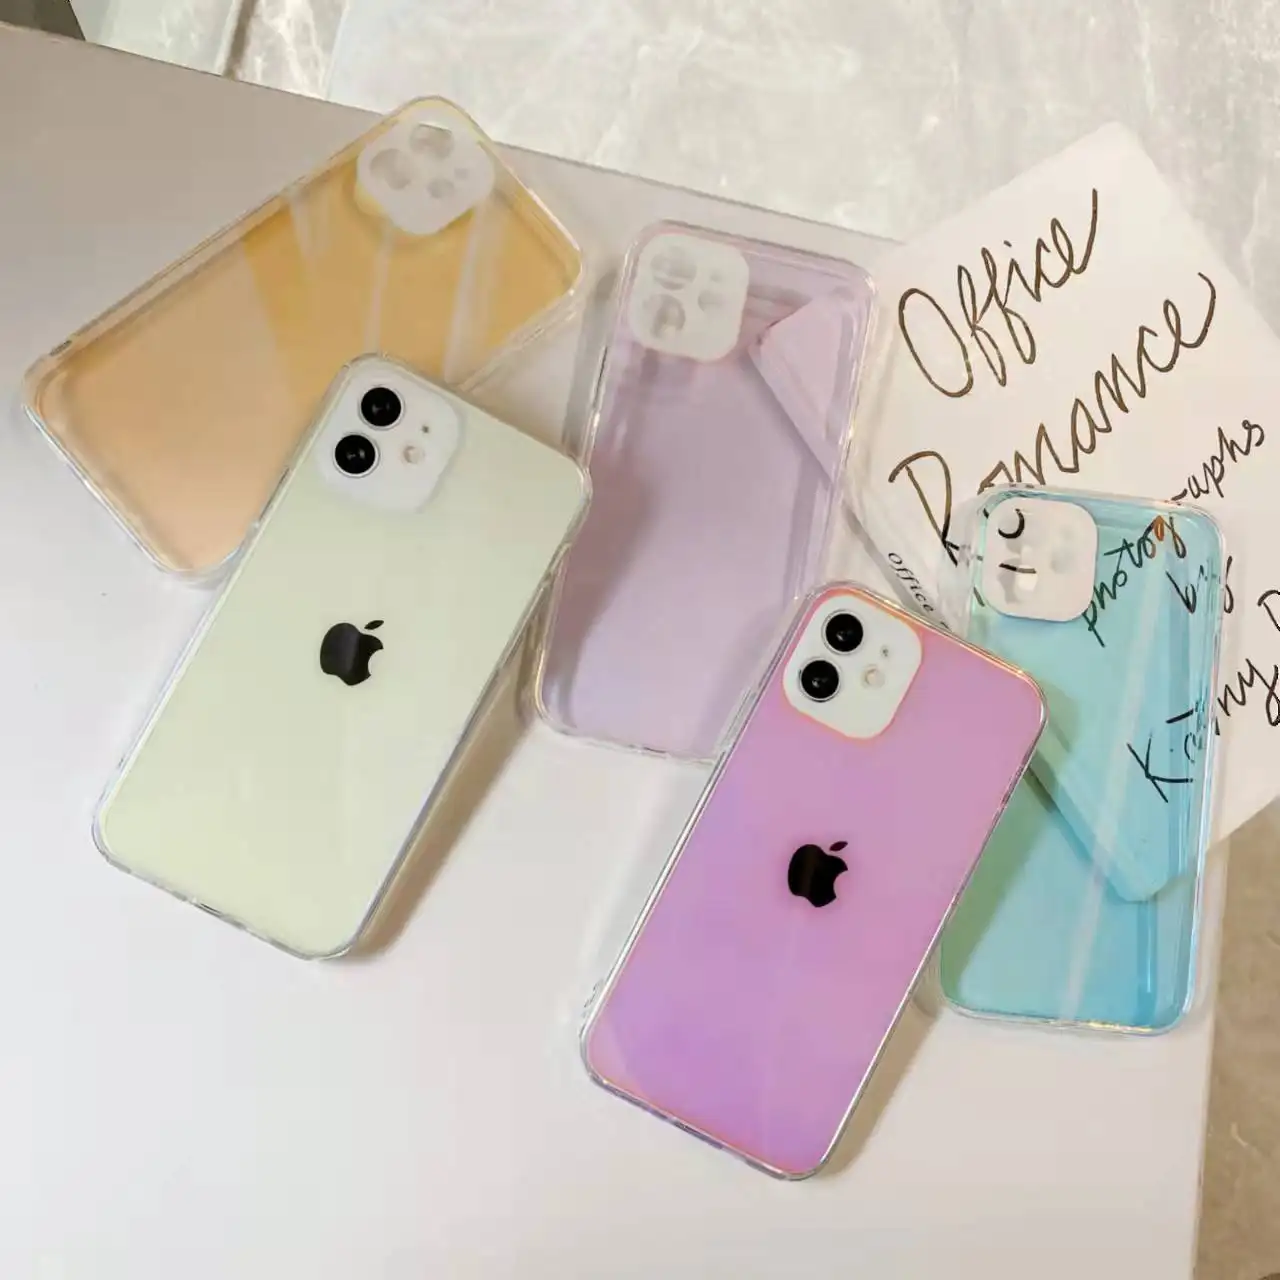 Clear Aurora Dazzling colorful acrylic hard phone case for iphone 12 13 13 pro strong protective back cover